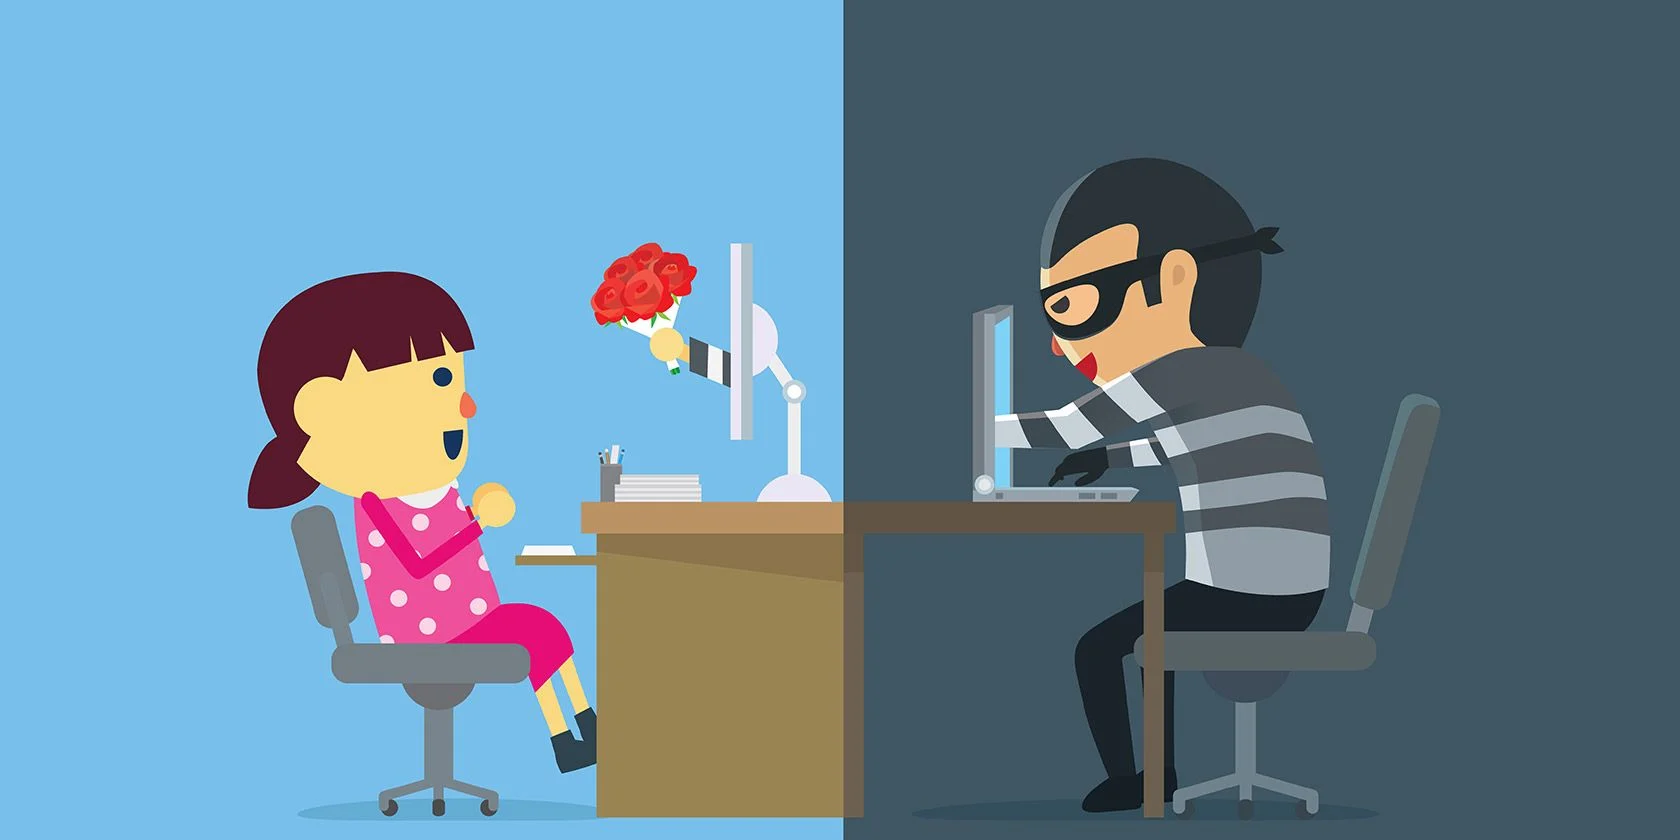 How Do You Deal with Online Dating Scams?